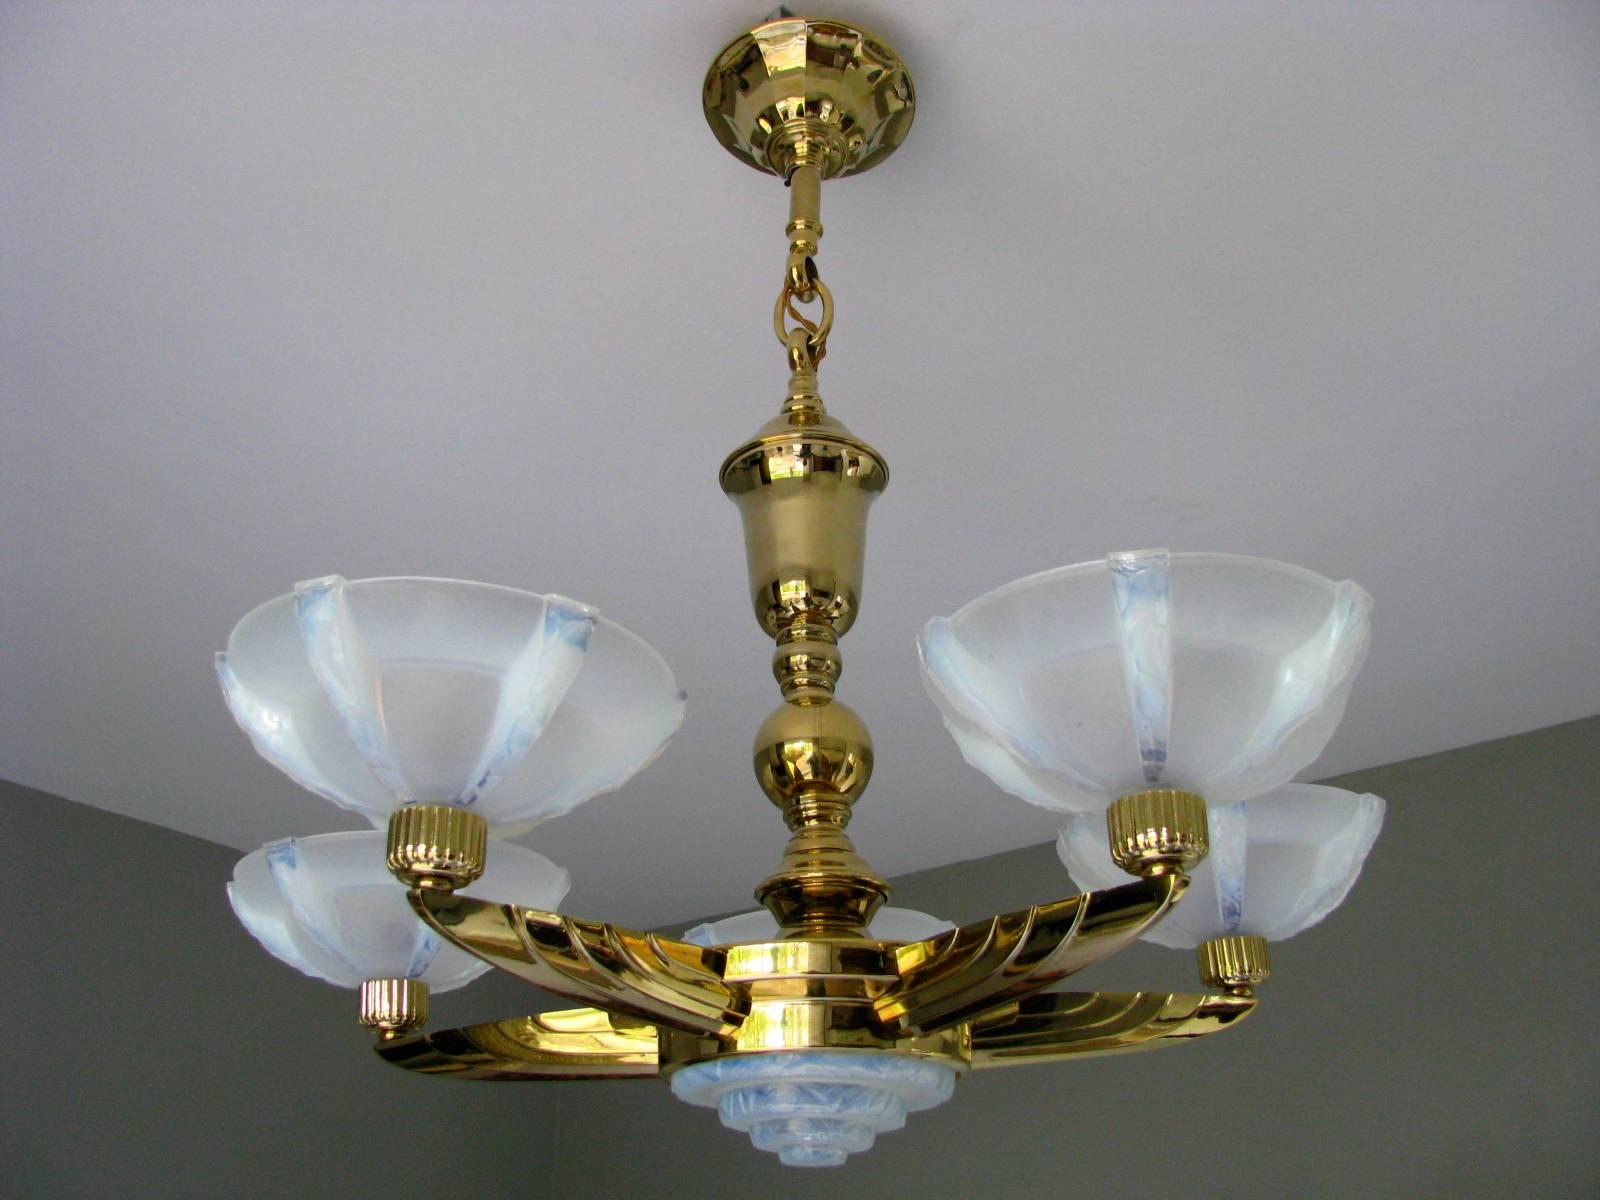 Original Art Deco chandelier by Atelier Petitot. 24-karat gold plated bronze. Frosted/hammered shades in blue opalescent glass.

Signed Petitot. 

Six lights. Newly rewired.

We offer door to door shipping. Please ask for your quote.